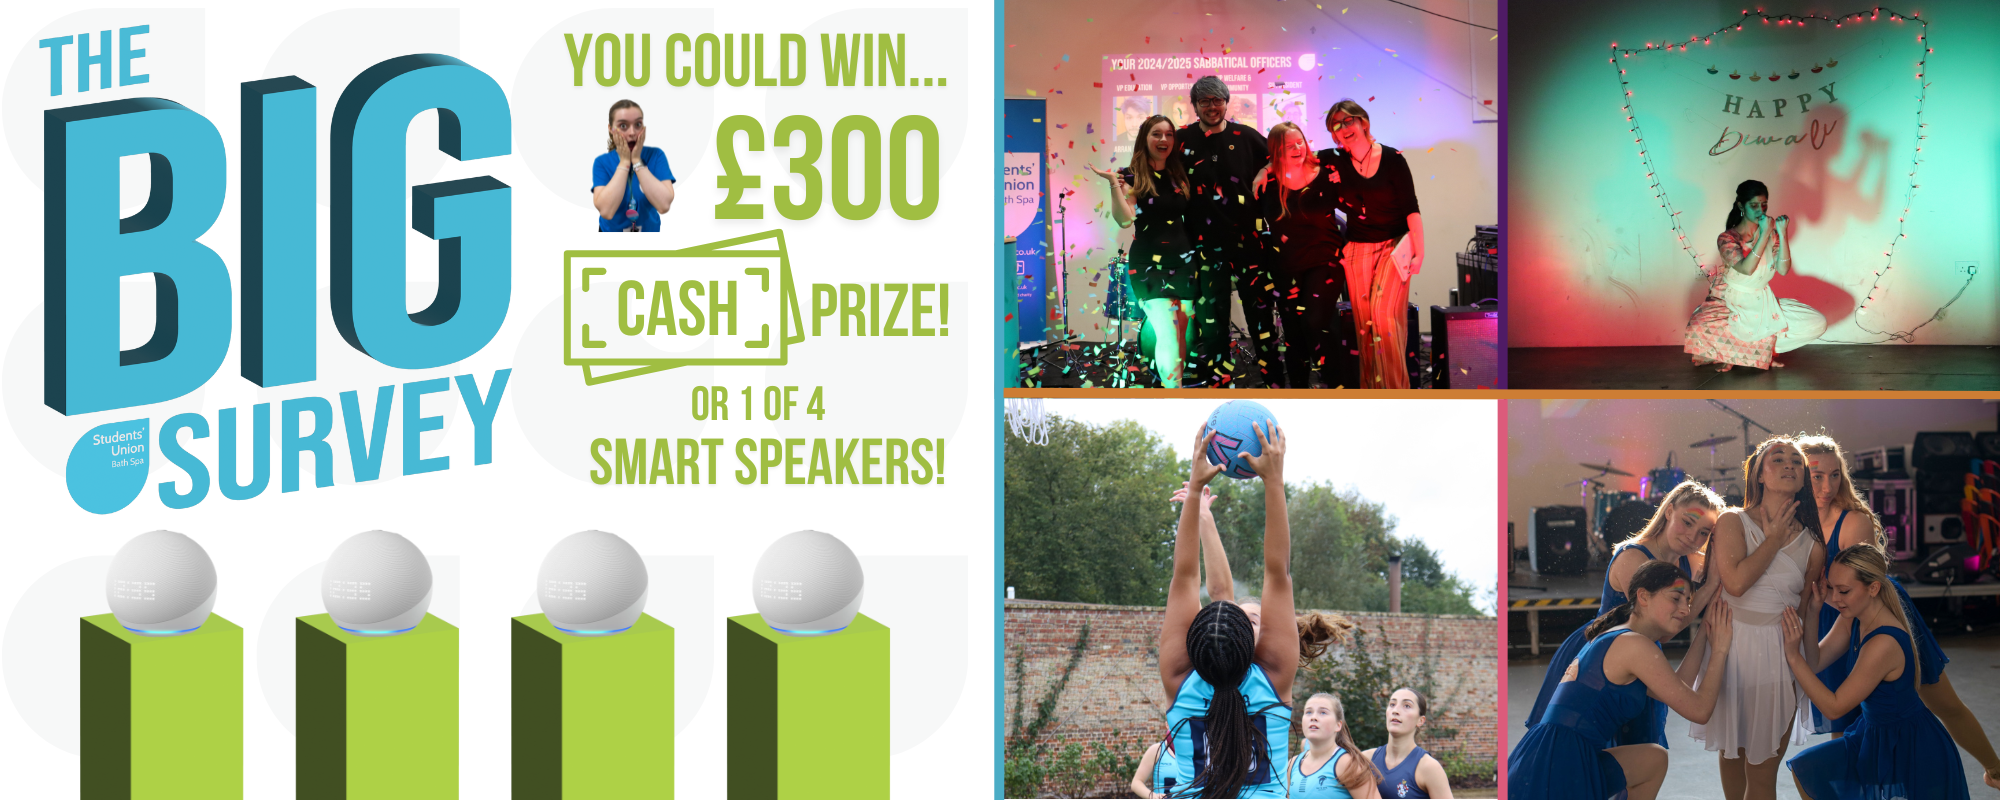 Fill in our Big SU Survey for the chance to win £300 or 1 of 4 smart speakers!